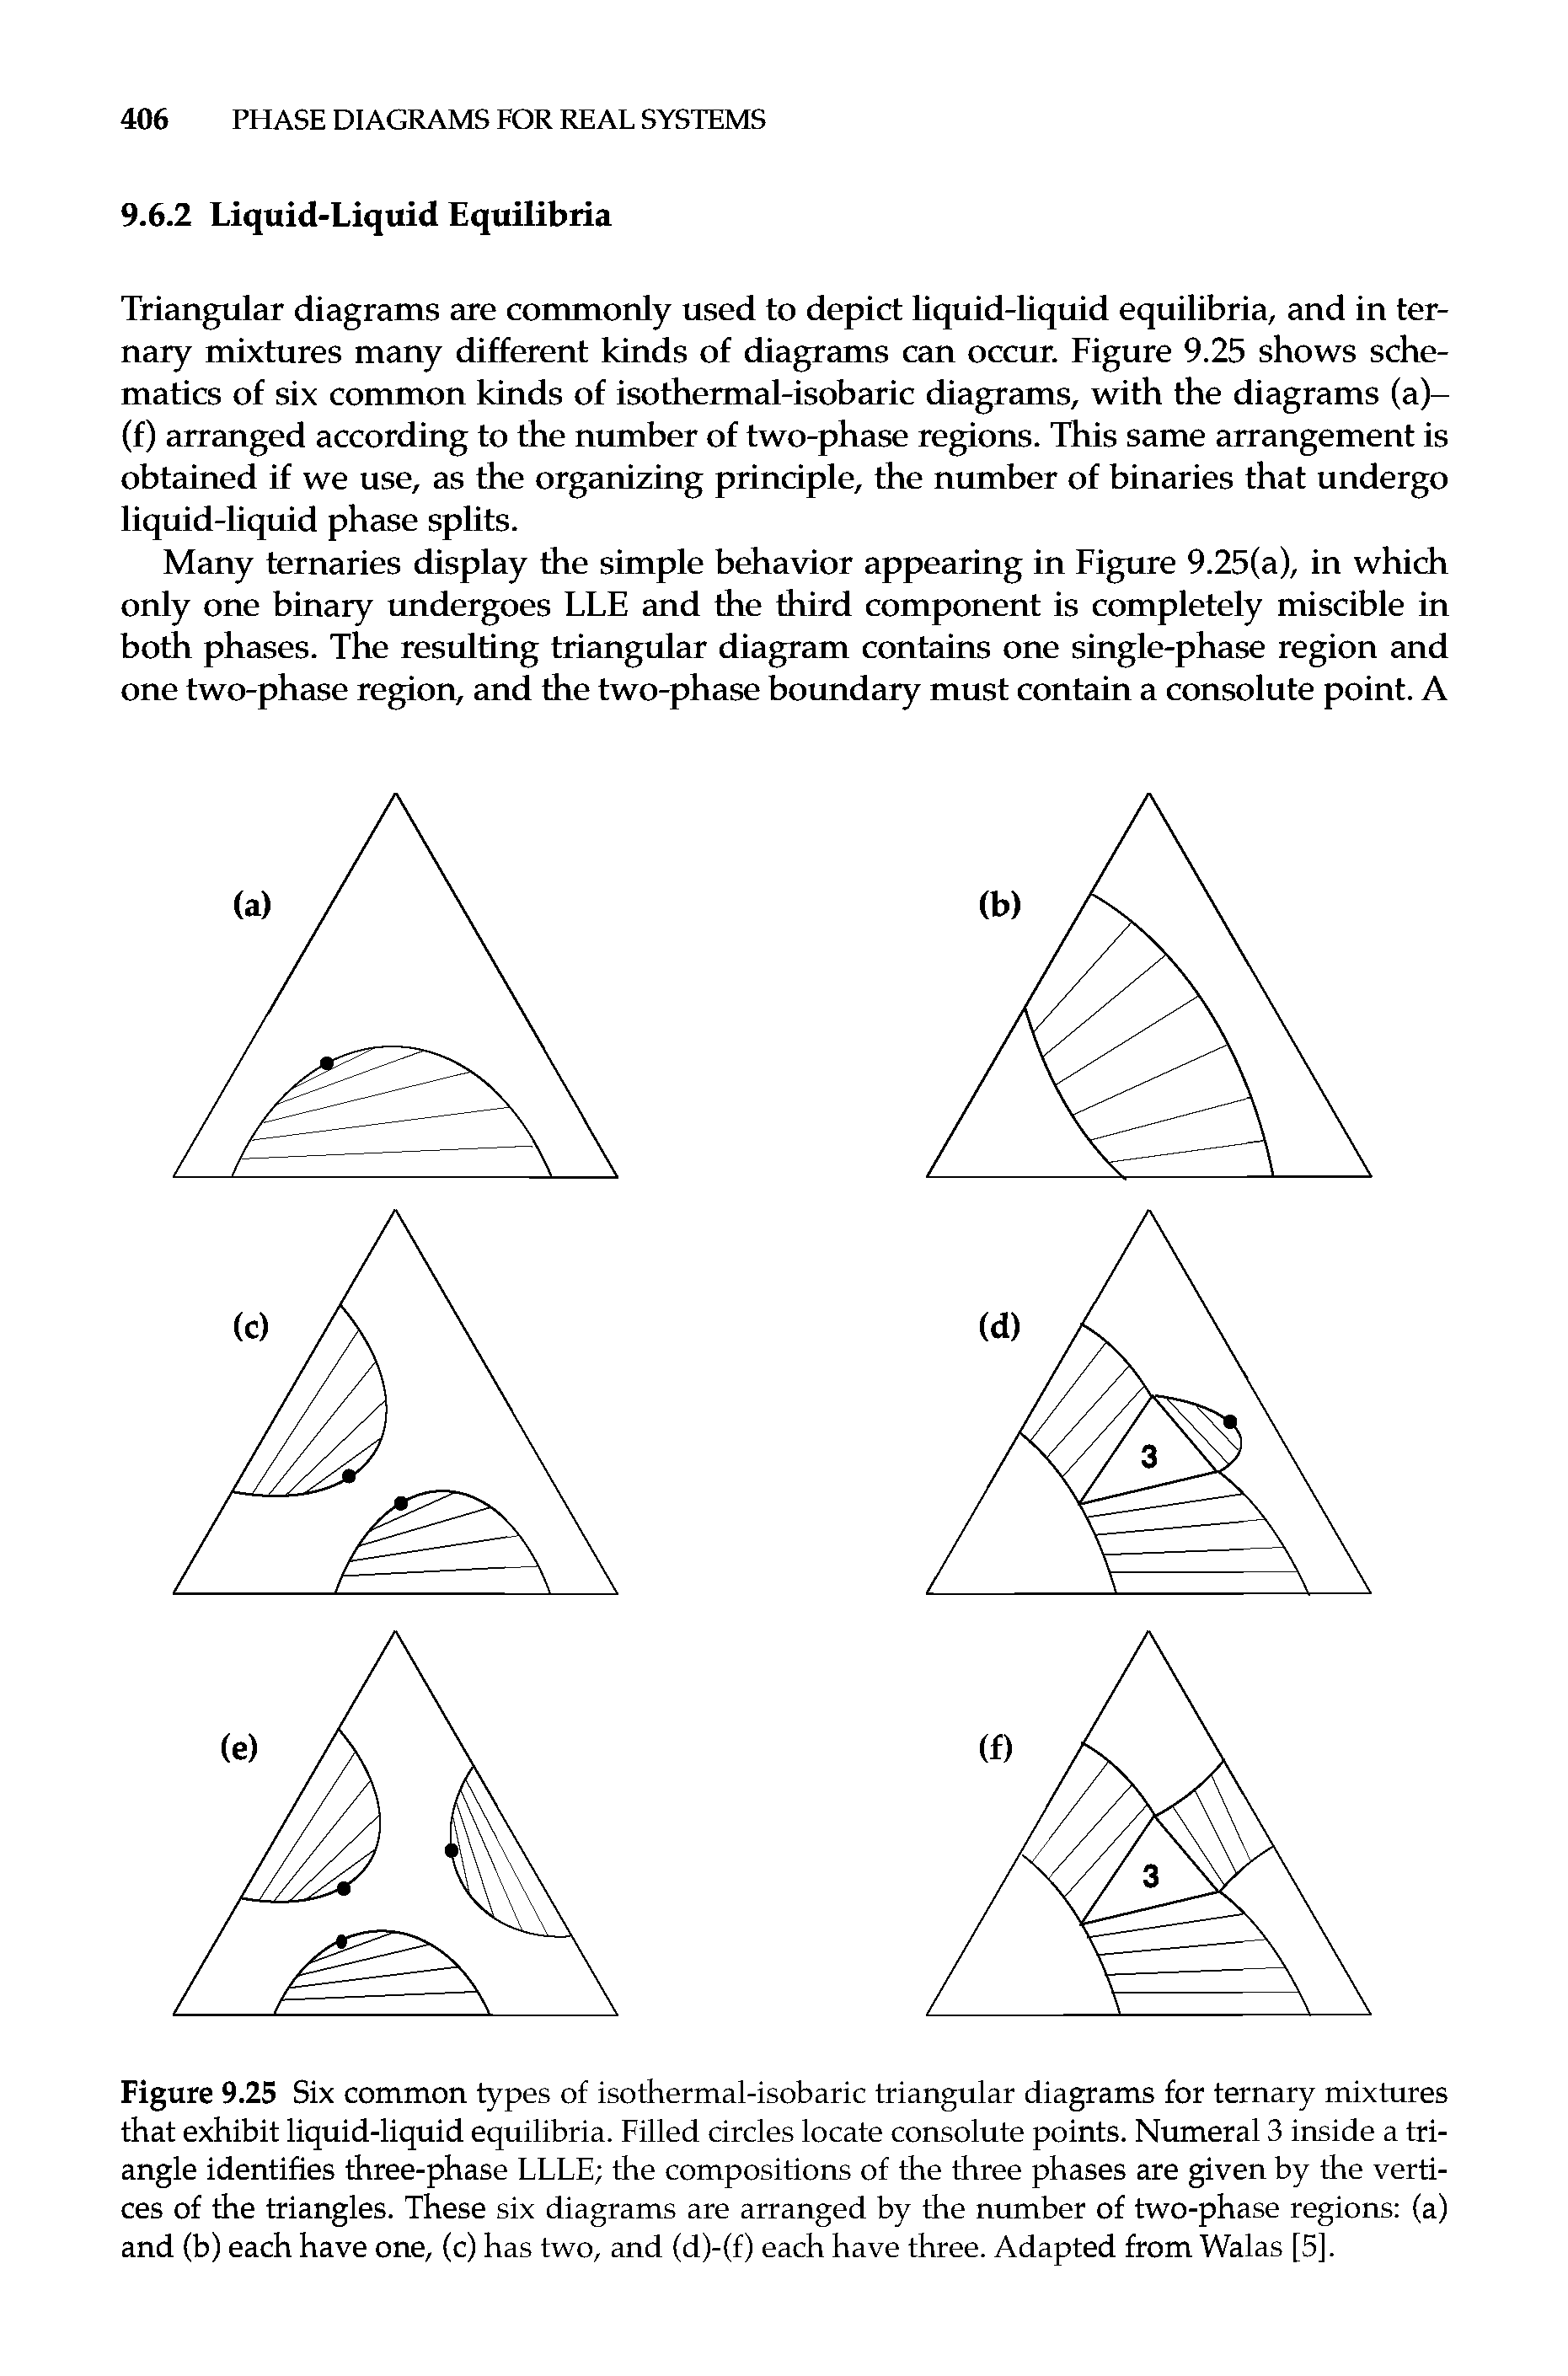 Figure 9.25 Six common types of isothermal-isobaric triangular diagrams for ternary mixtures that exhibit liquid-liquid equilibria. Filled circles locate consolute points. Numeral 3 inside a triangle identifies three-phase LLLE the compositions of the three phases are given by the vertices of the triangles. These six diagrams are arranged by the number of two-phase regions (a) and (b) each have one, (c) has two, and (d)-(f) each have three. Adapted from Walas [5].